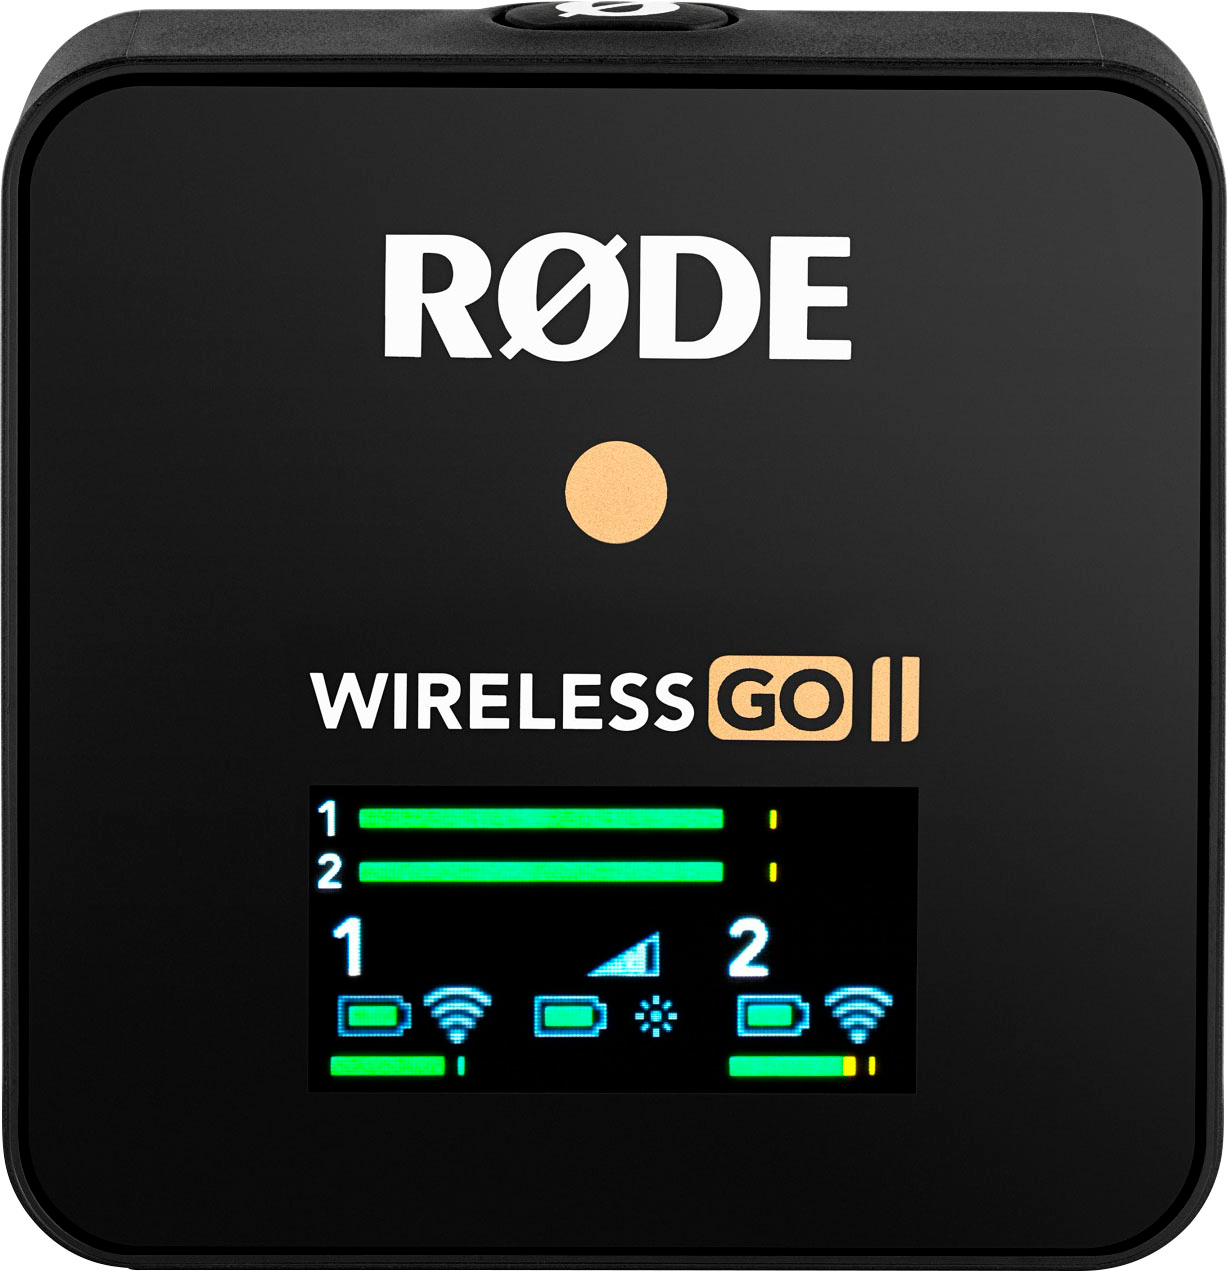 Rode Wireless Go Microphone Systems for sale in Medellín, Antioquia, Facebook Marketplace